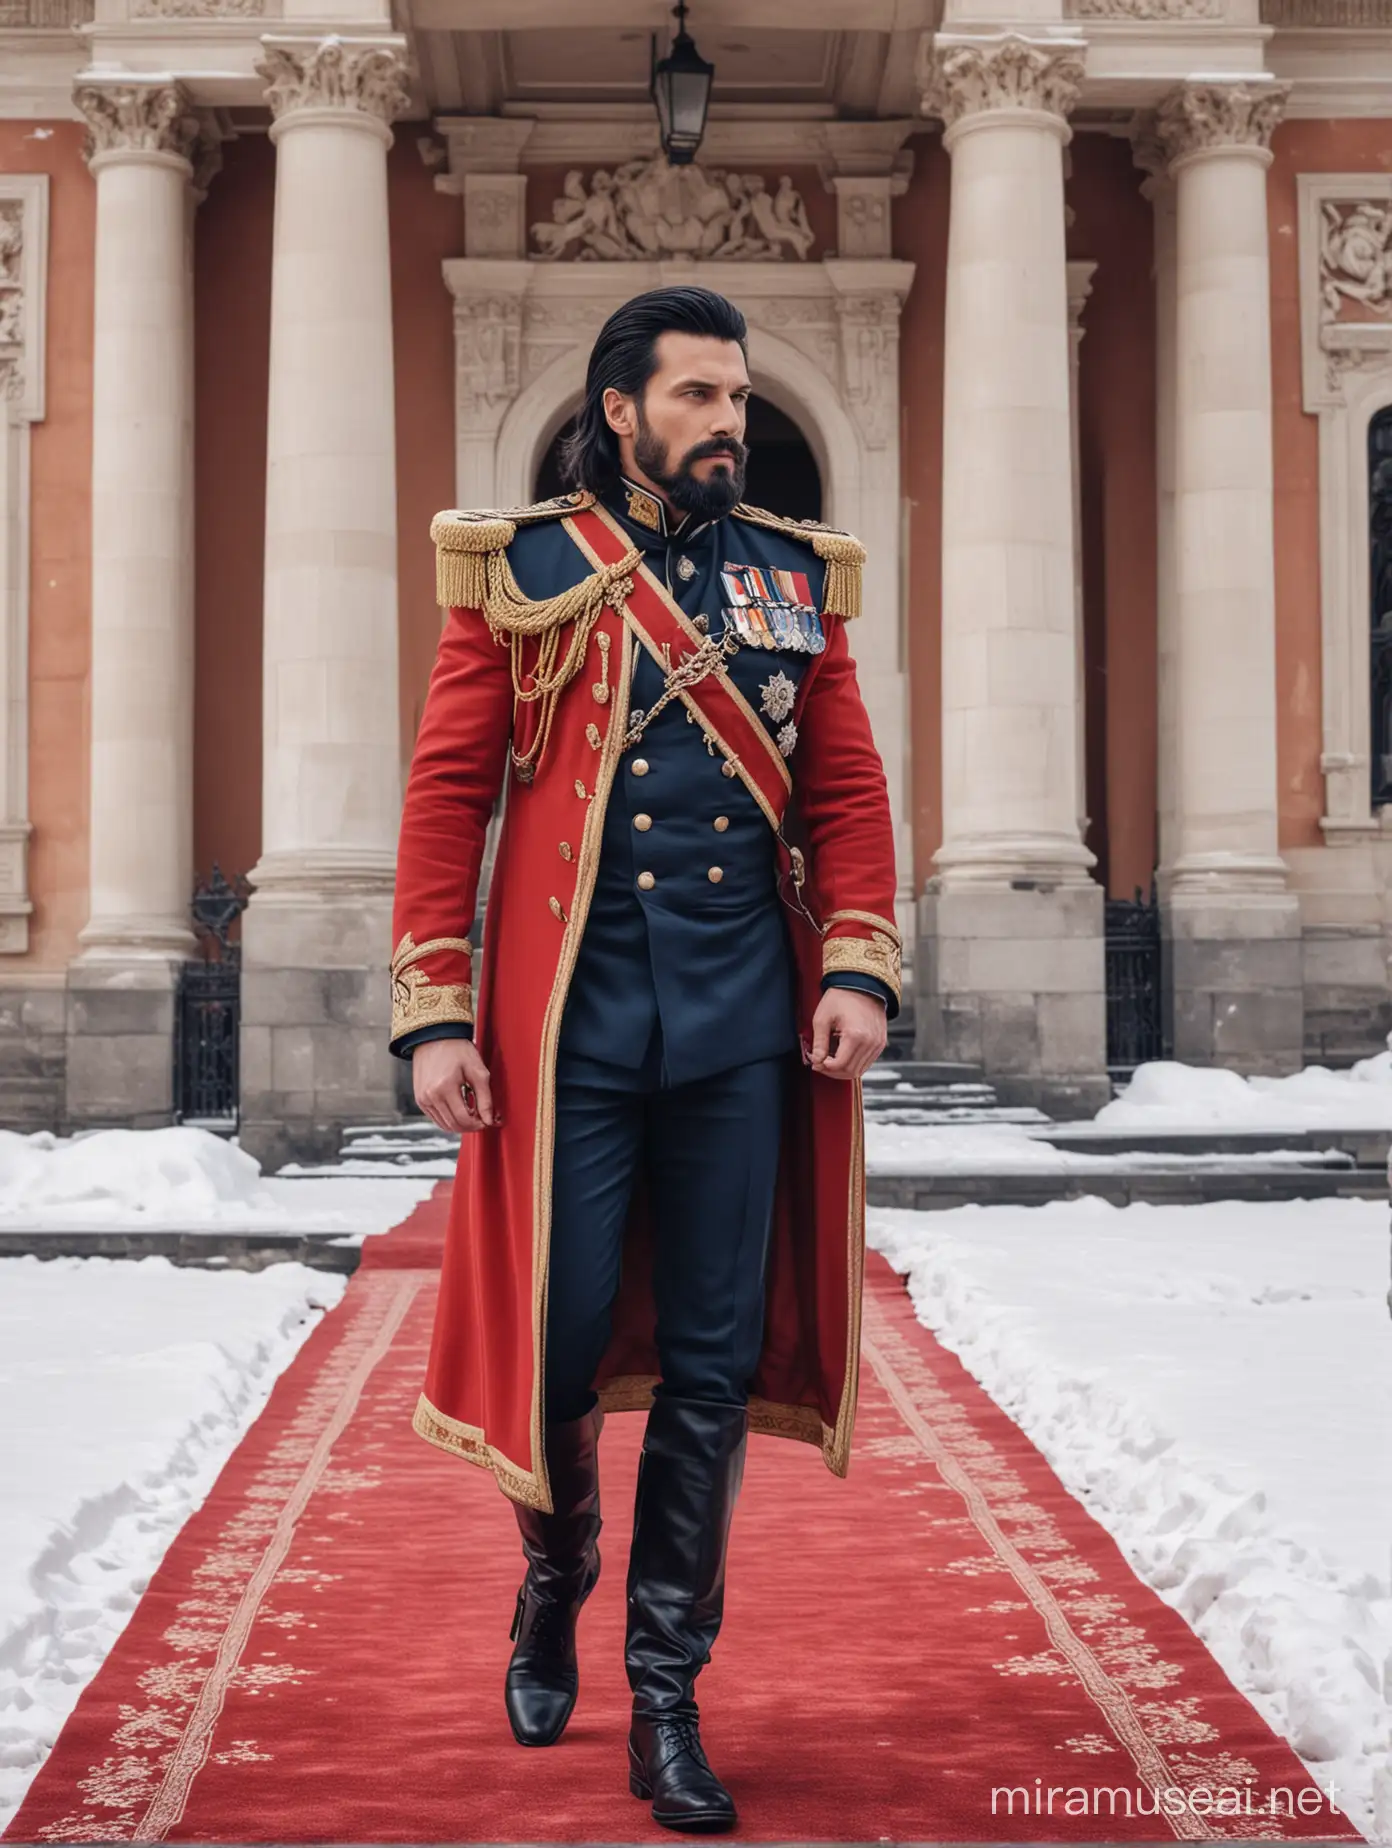 Tall and handsome muscular king with beautiful black hairstyle and beard with attractive eyes and Big wide shoulder in Navy cavalry suit with Coat walking out on red carpet outside snowy palace